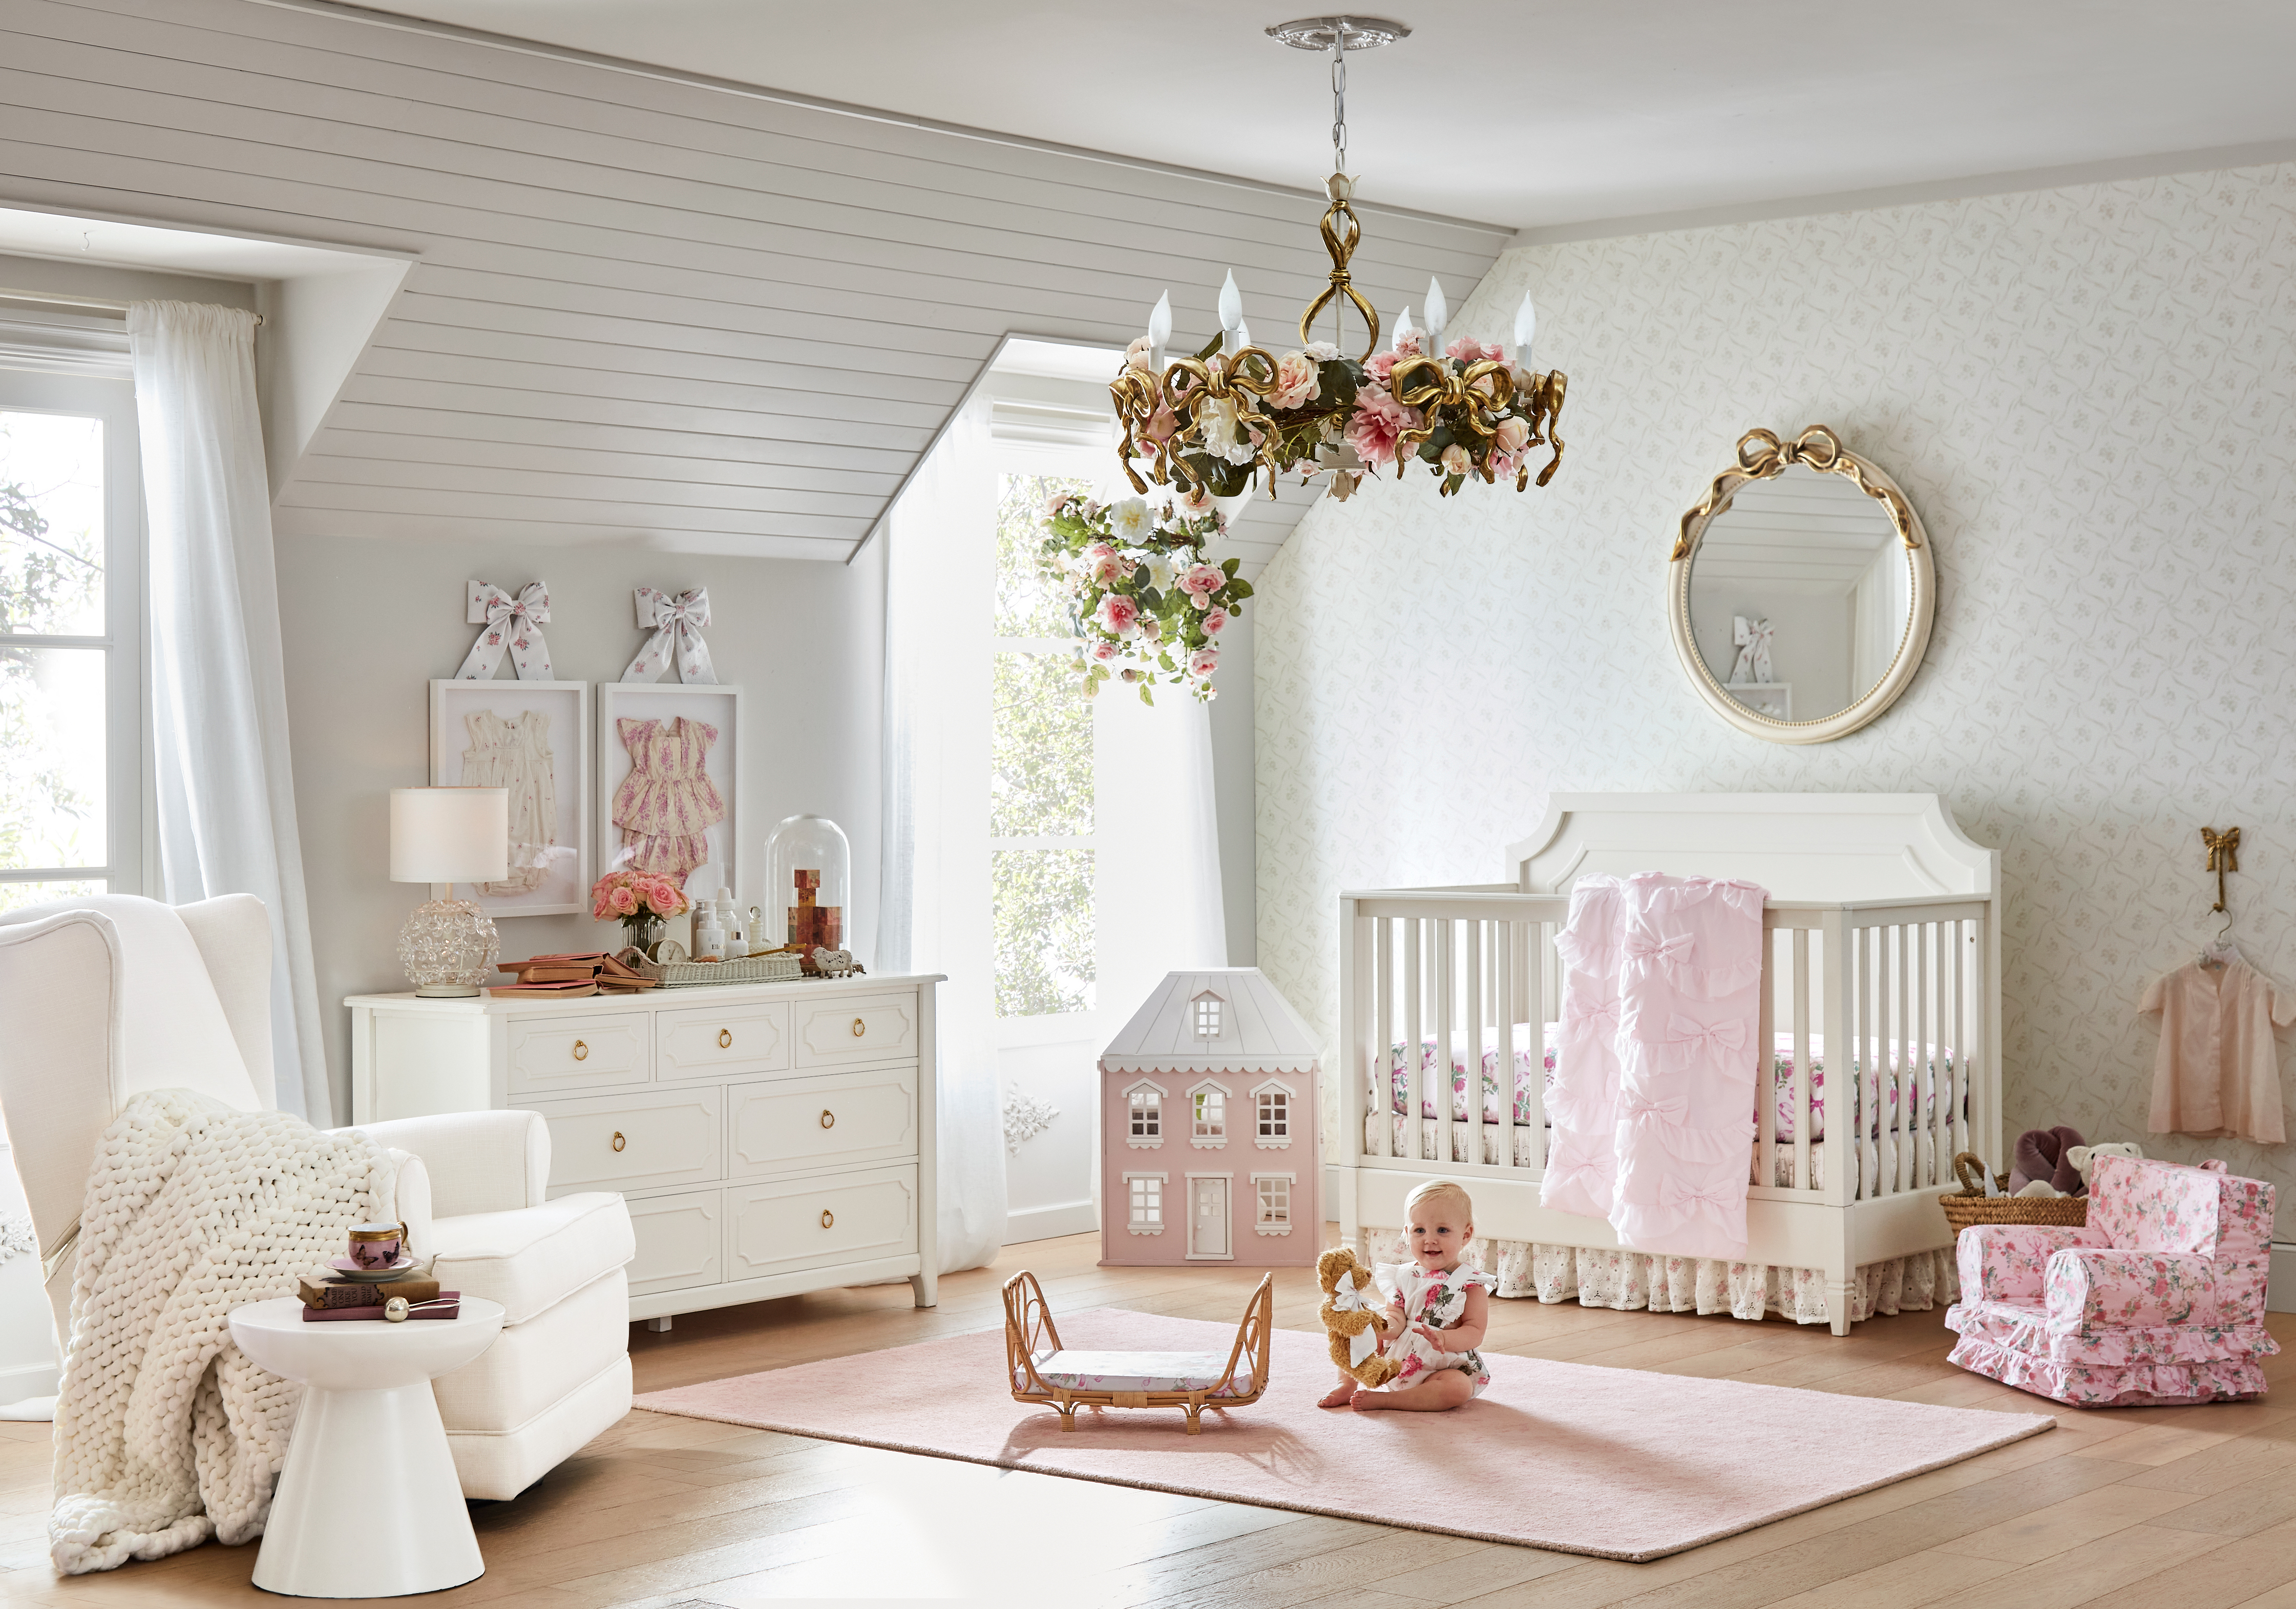 POTTERY BARN KIDS AND POTTERY BARN TEEN DEBUT EXCLUSIVE HOME FURNISHINGS  COLLABORATION WITH ICONIC FASHION BRAND LOVESHACKFANCY